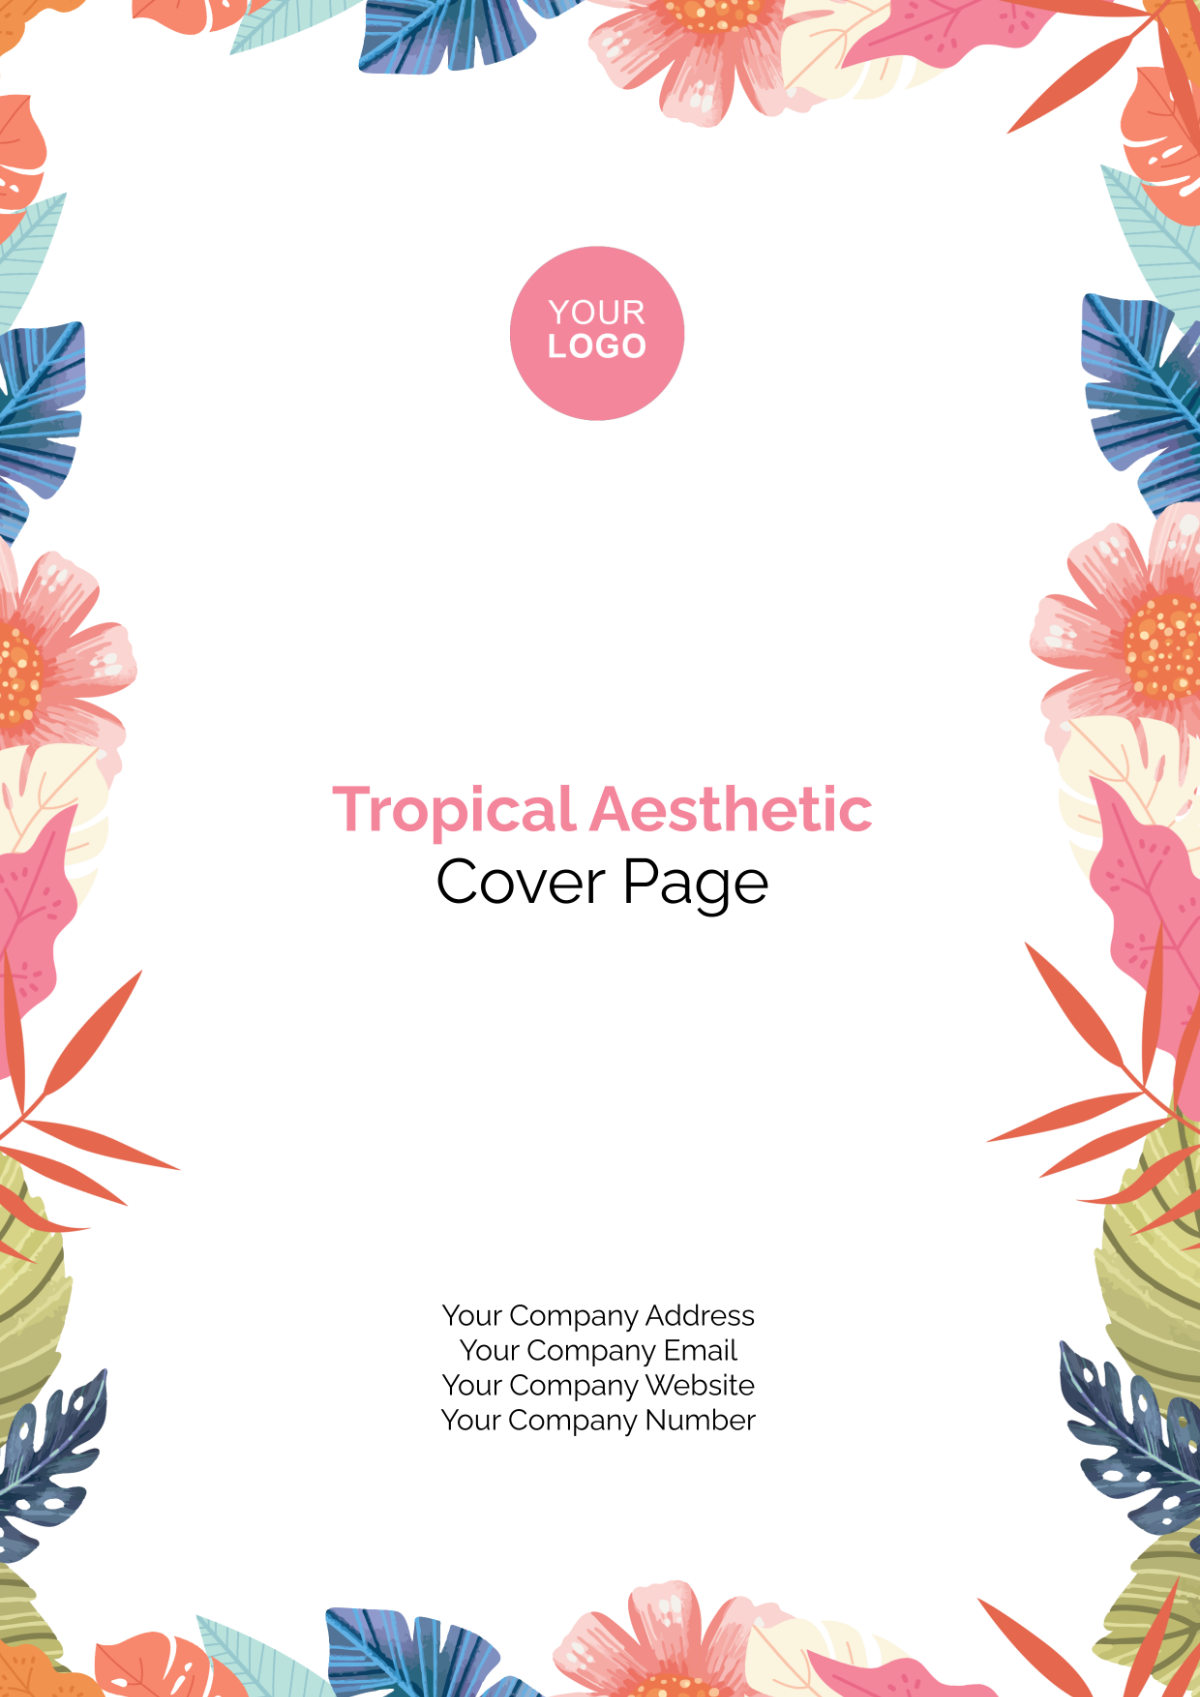 Tropical Aesthetic Cover Page